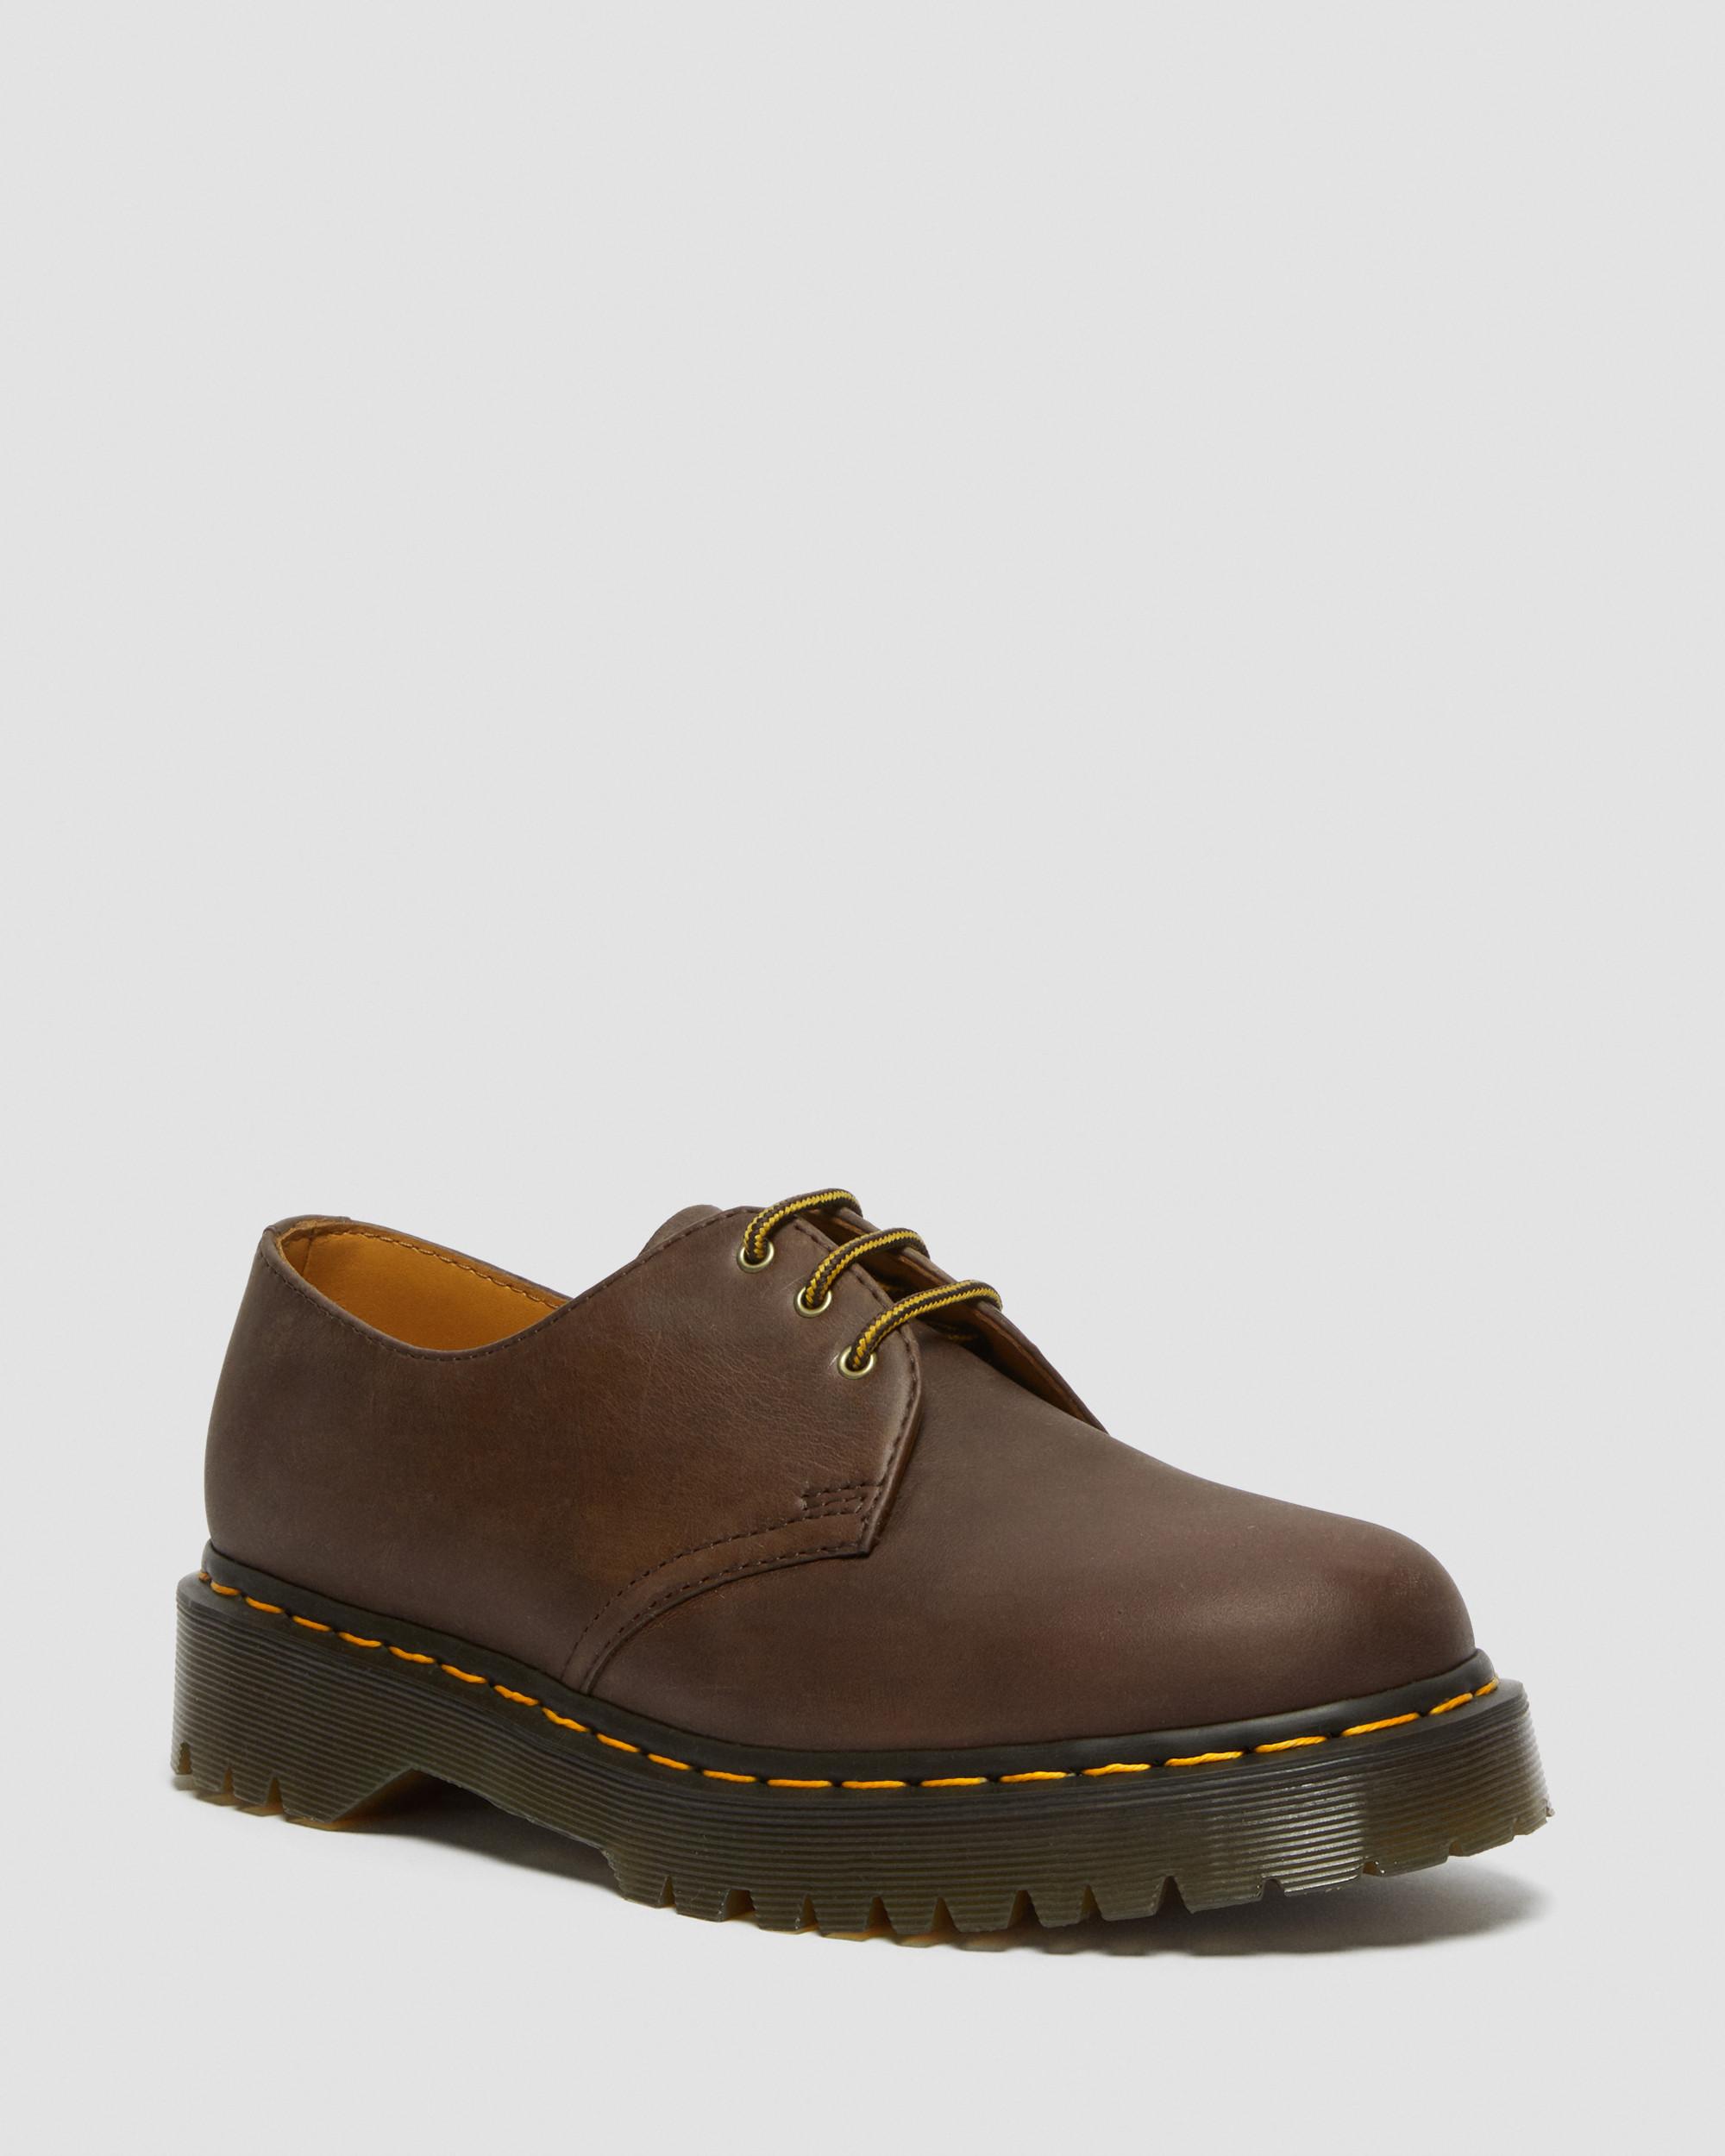 DR MARTENS 1461 Bex Crazy Horse Leather Oxford Shoes